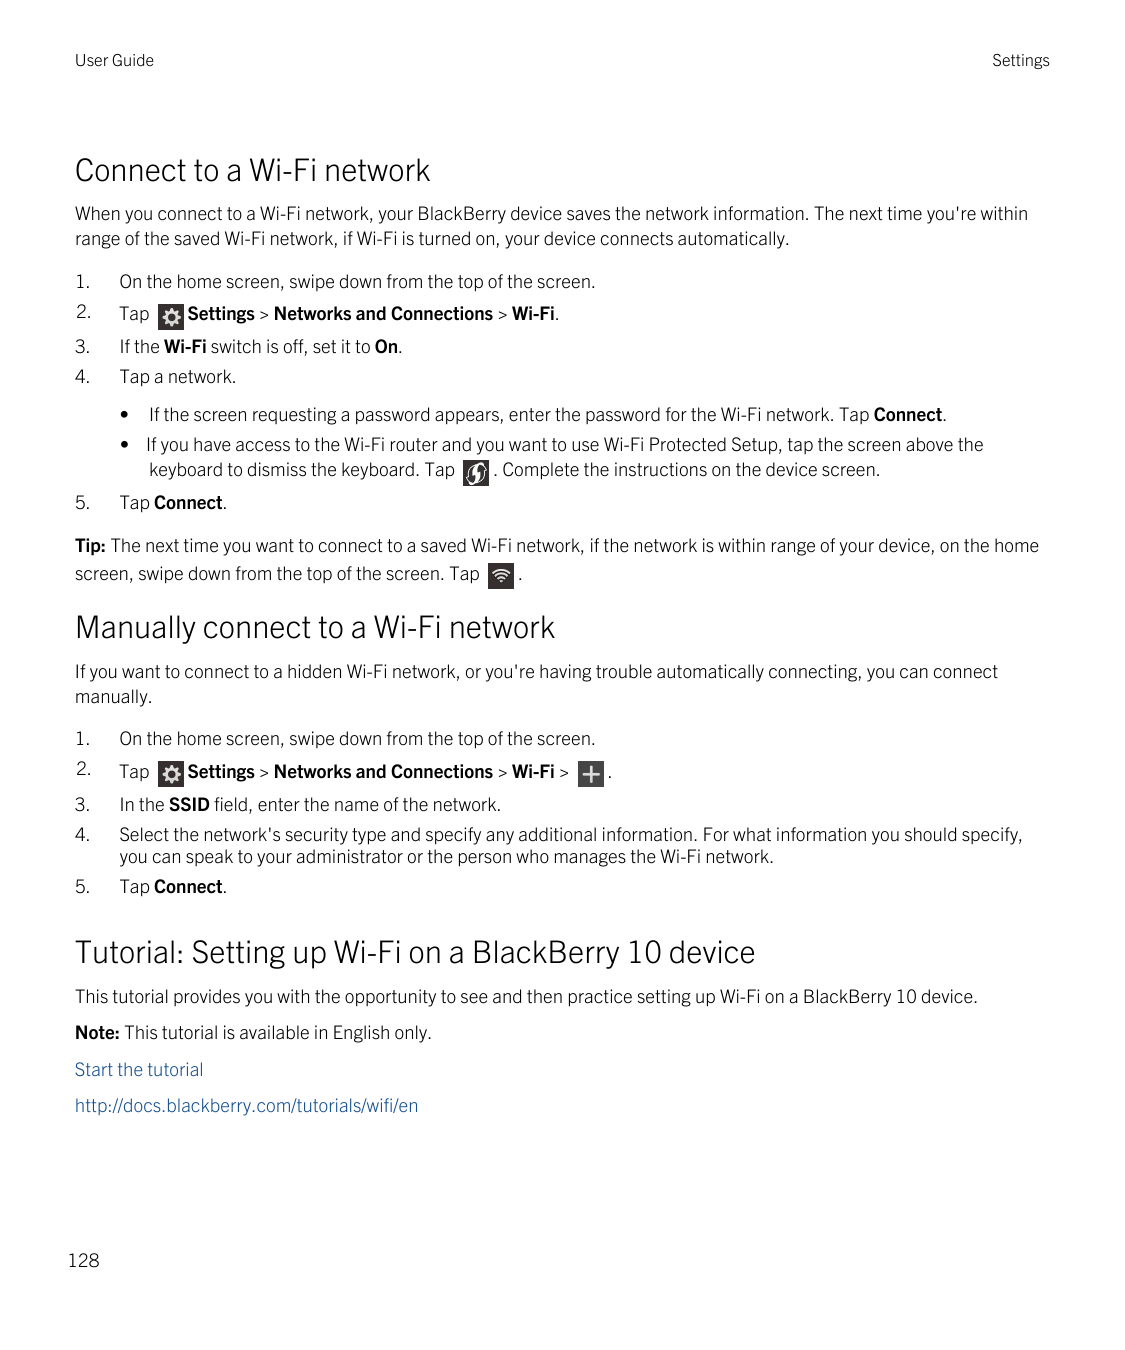 User GuideSettingsConnect to a Wi-Fi networkWhen you connect to a Wi-Fi network, your BlackBerry device saves the network inform